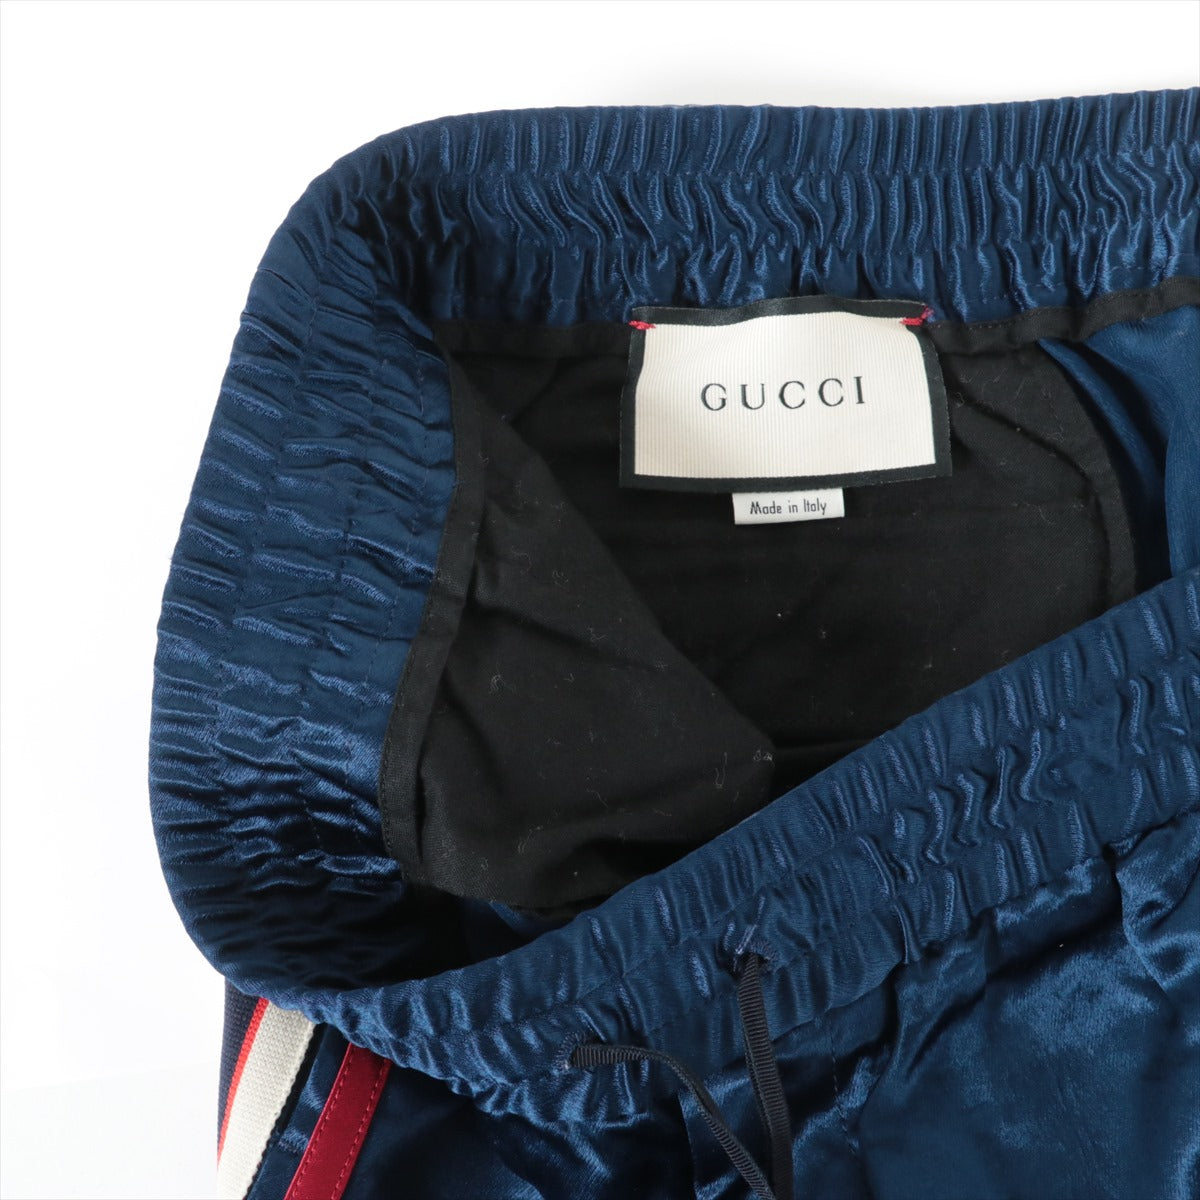 Gucci 17 years Acetate Track pants 50 Men's Blue  495697 Satin sideline